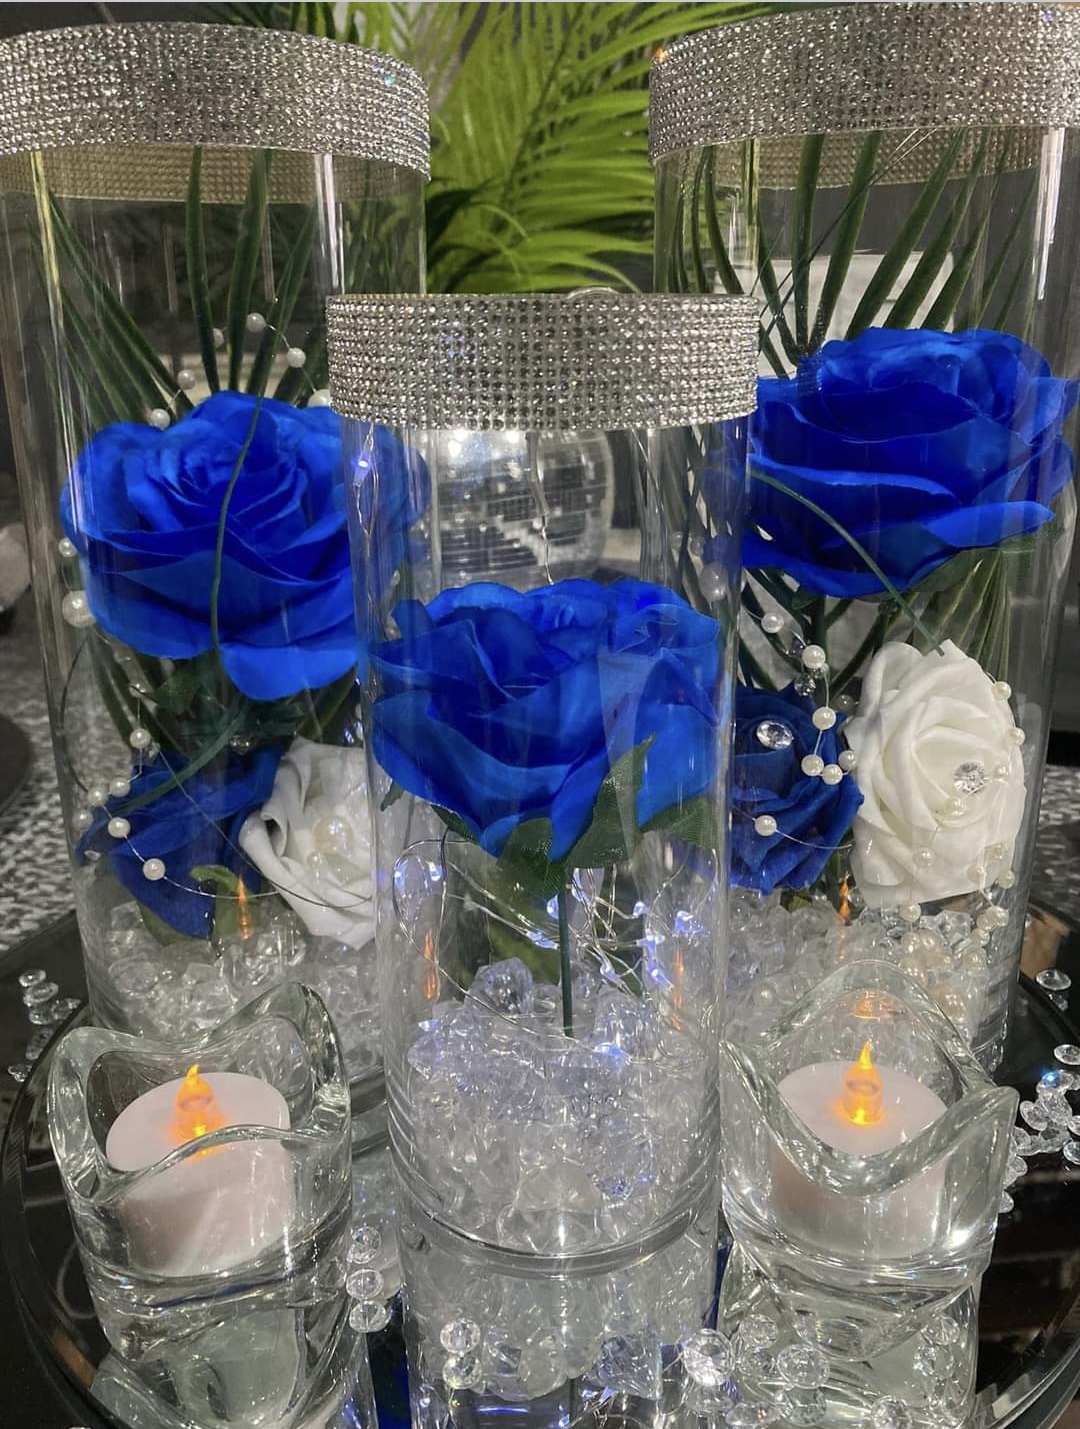 3 glass vases with diamanté rims and filled with blue and white roses